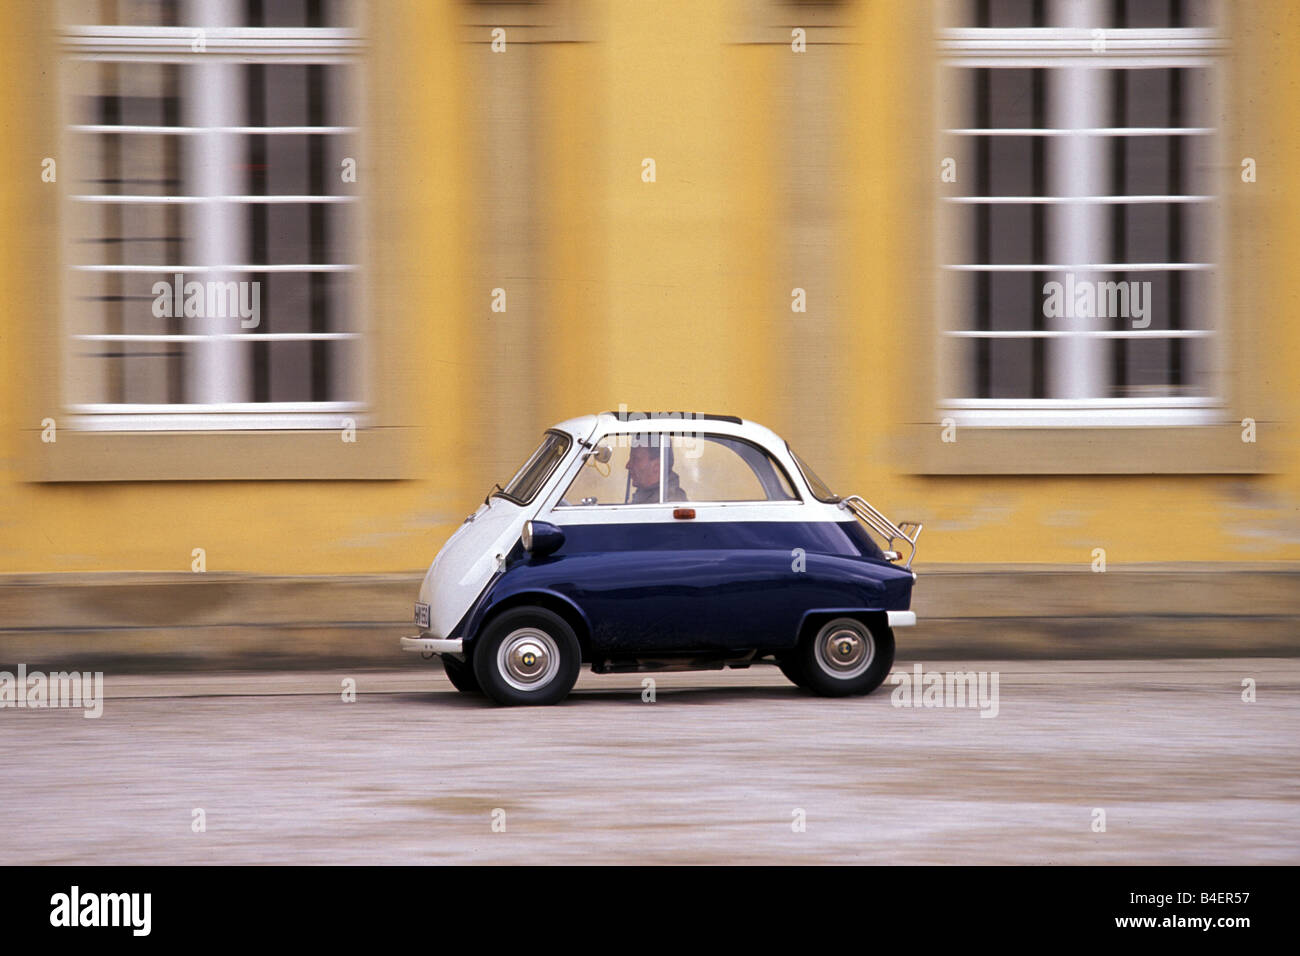 Car, BMW Isetta, vintage car, below 1950s, fifties, white-blue, driving, side view, city, landscape, scenery, photographer: Hans Stock Photo